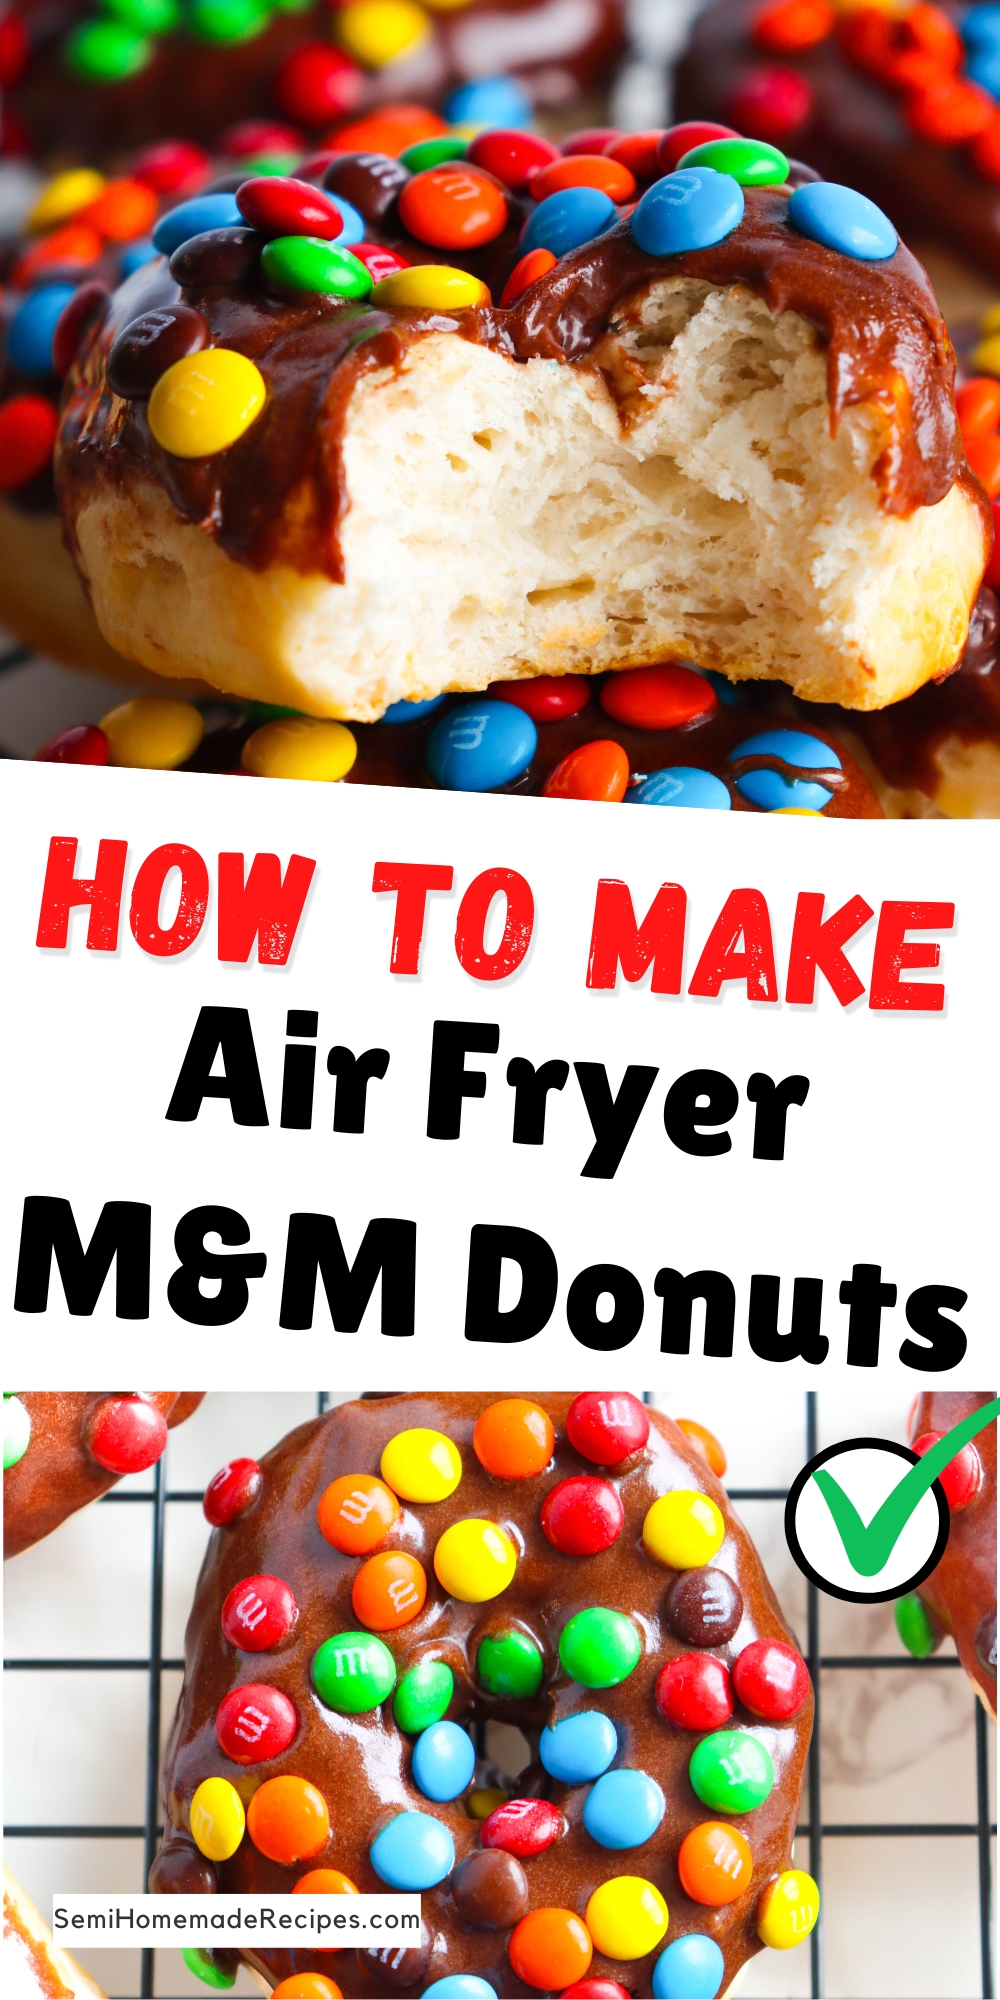 These Air Fryer M&M Donuts are fun to make and decorate with the kids! An easy and simple treat that just takes minutes to create! 